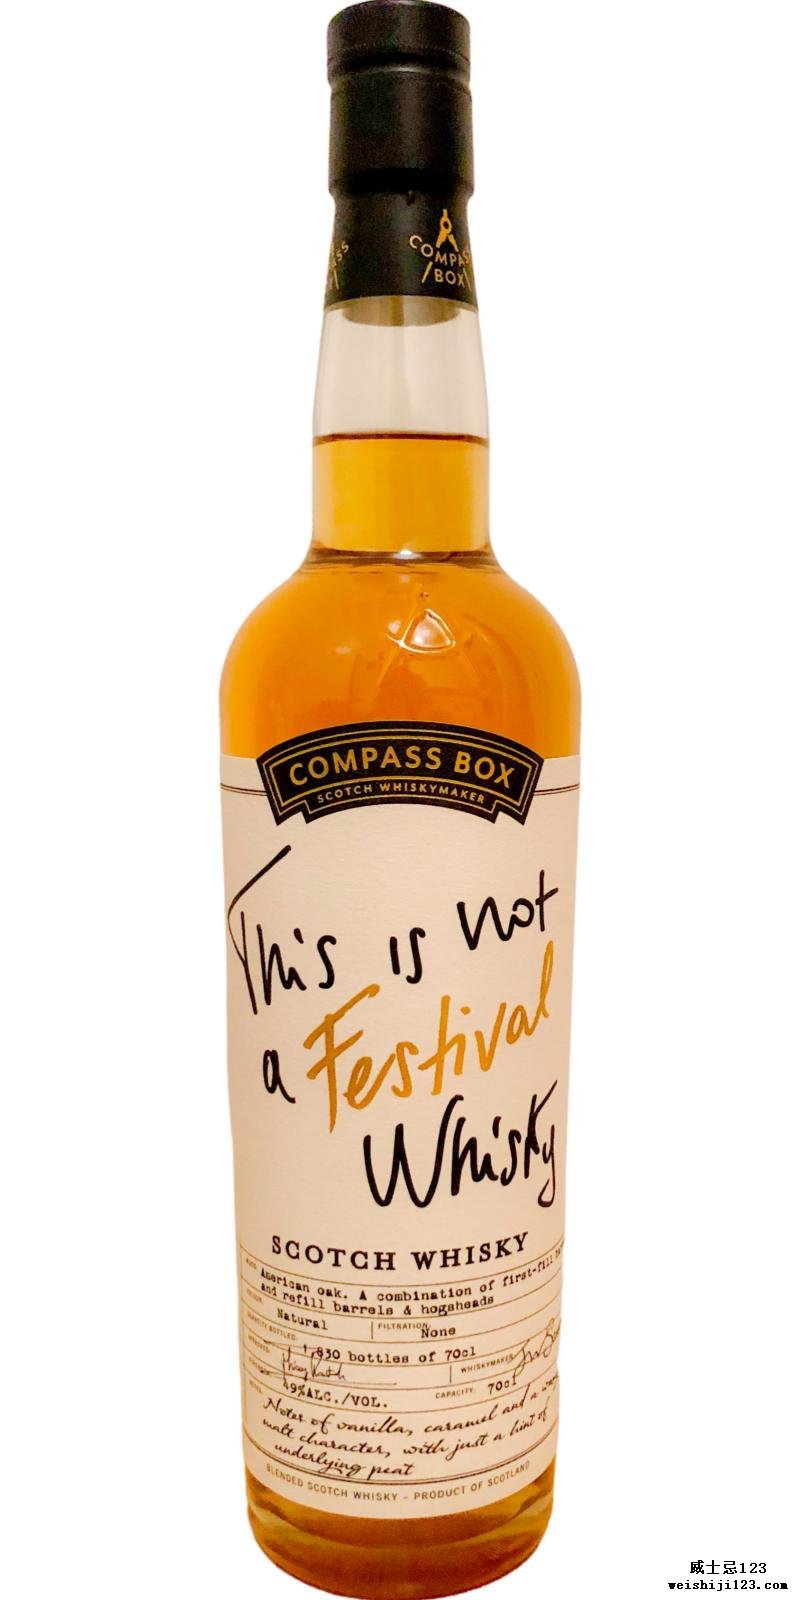 This is not a Festival Whisky NAS CB